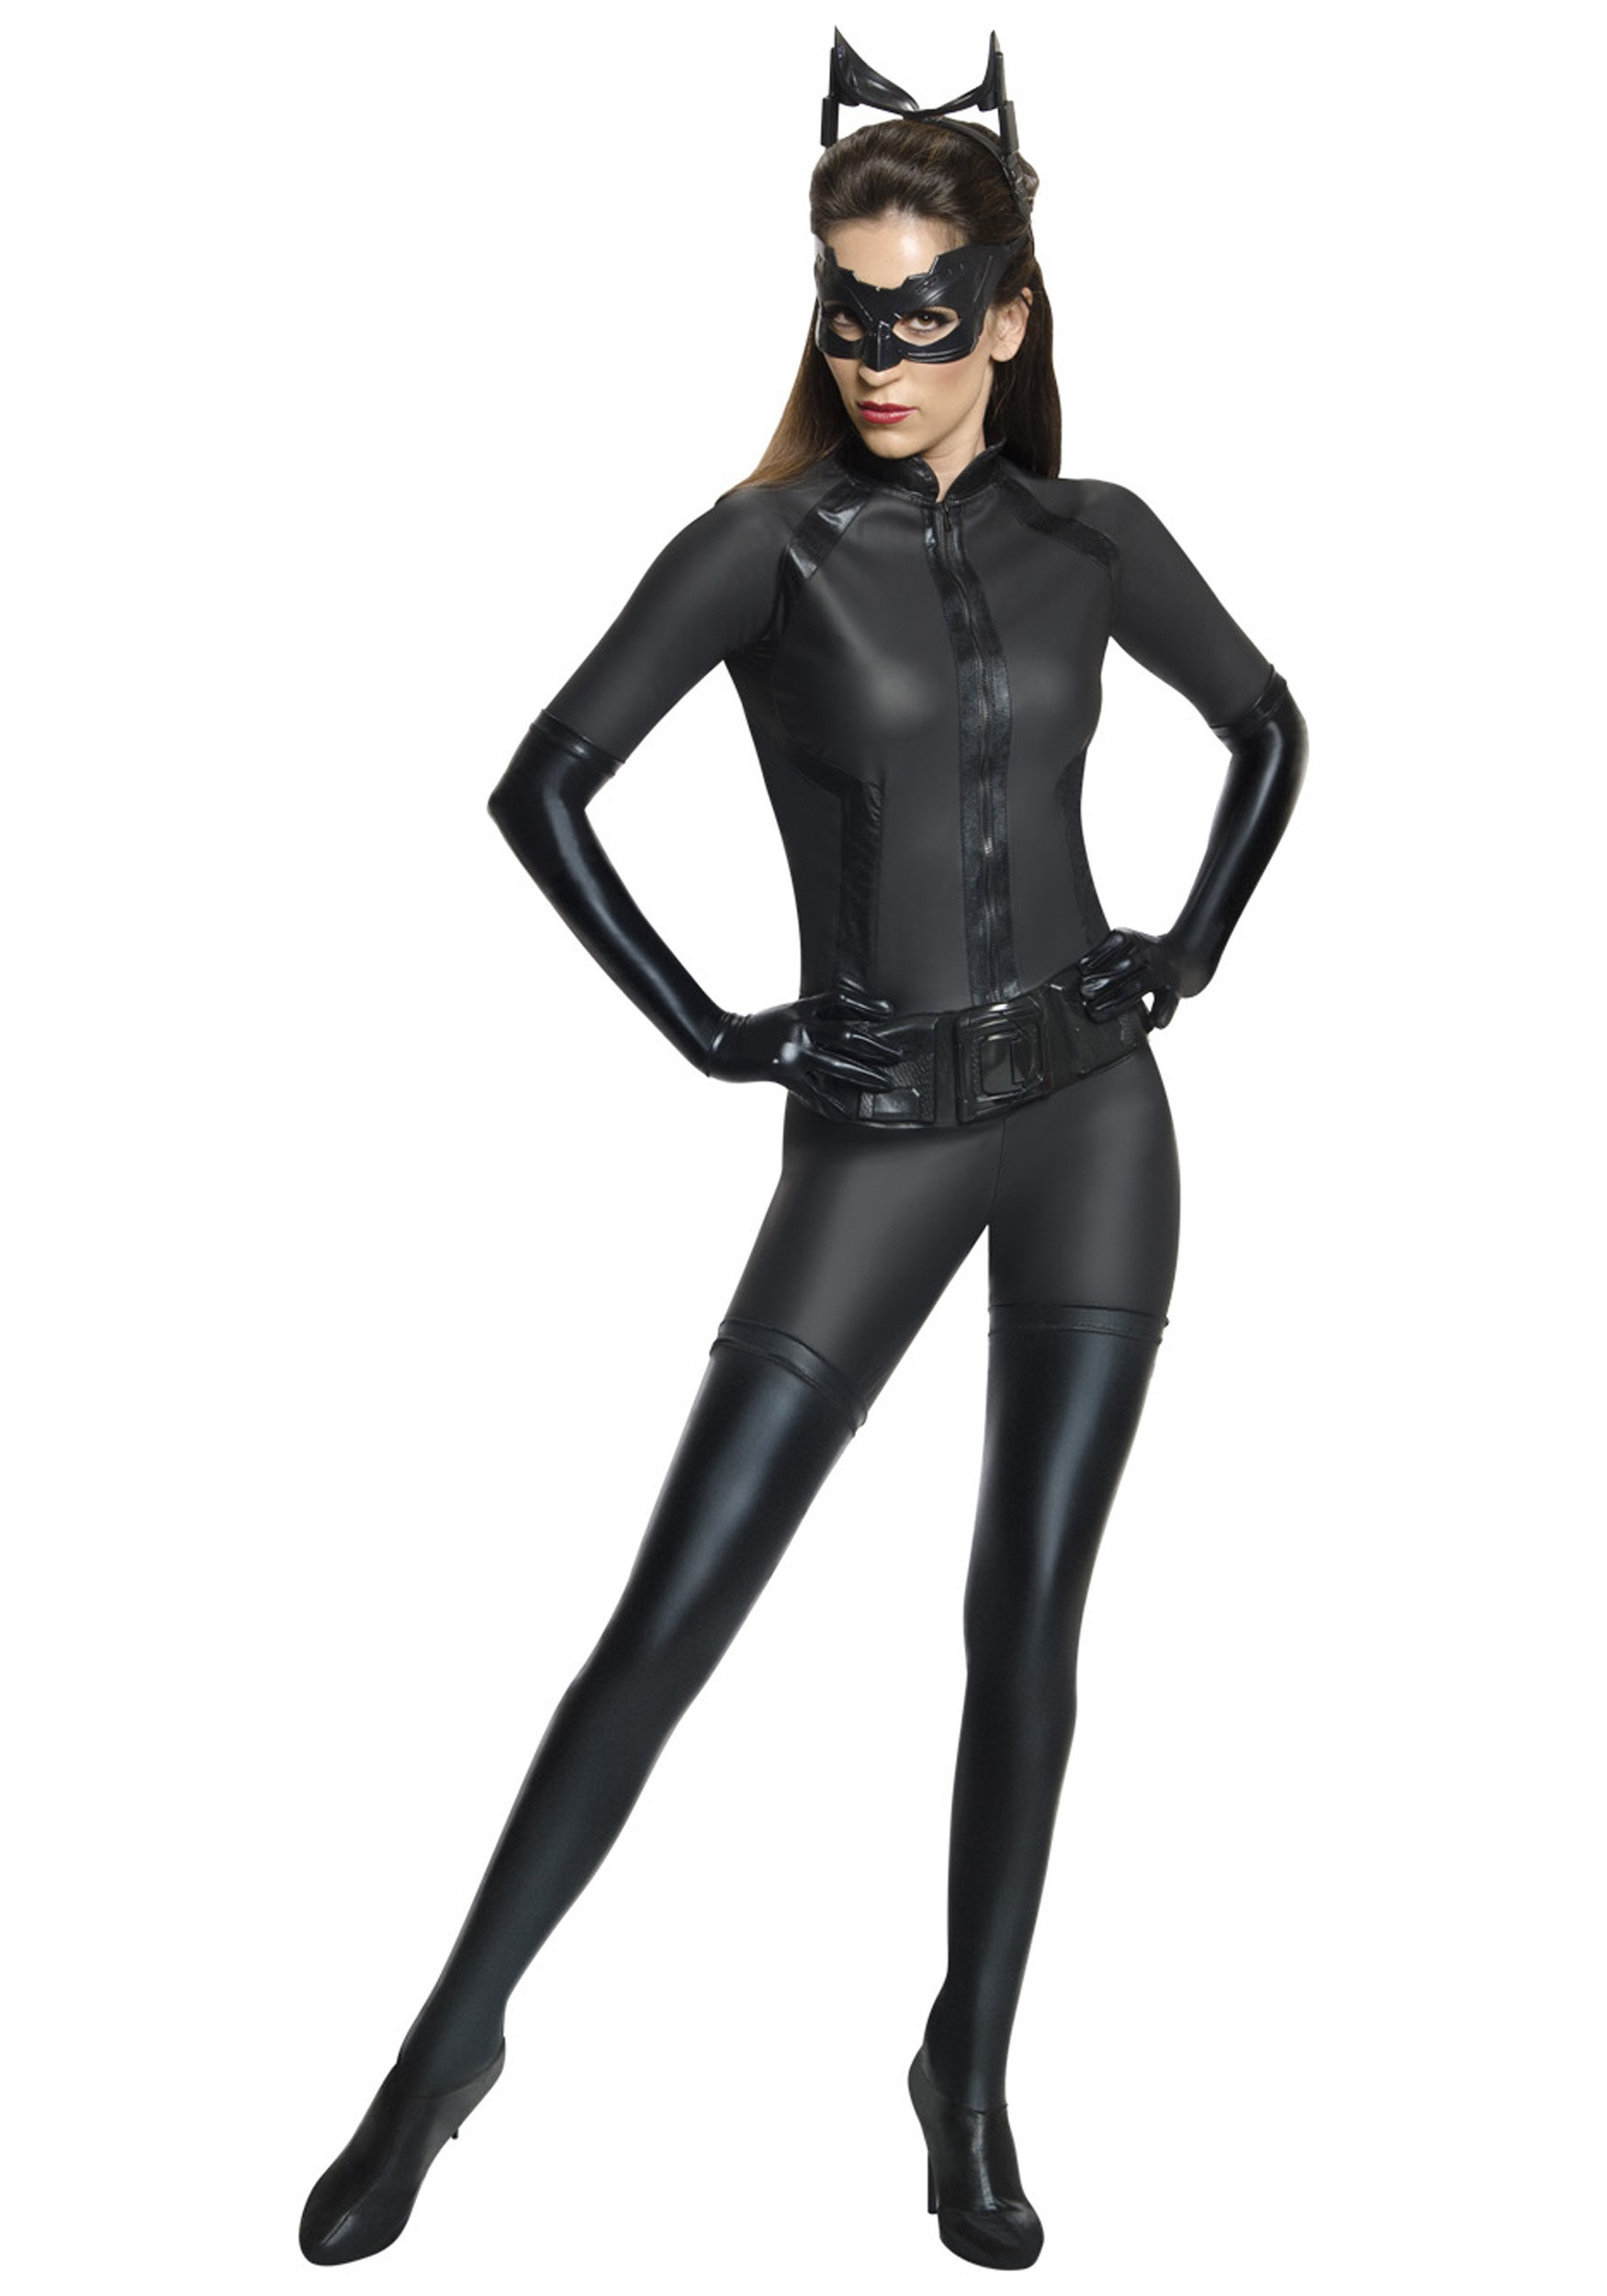 Catwoman DIY Costumes
 Grand Heritage Catwoman Costume